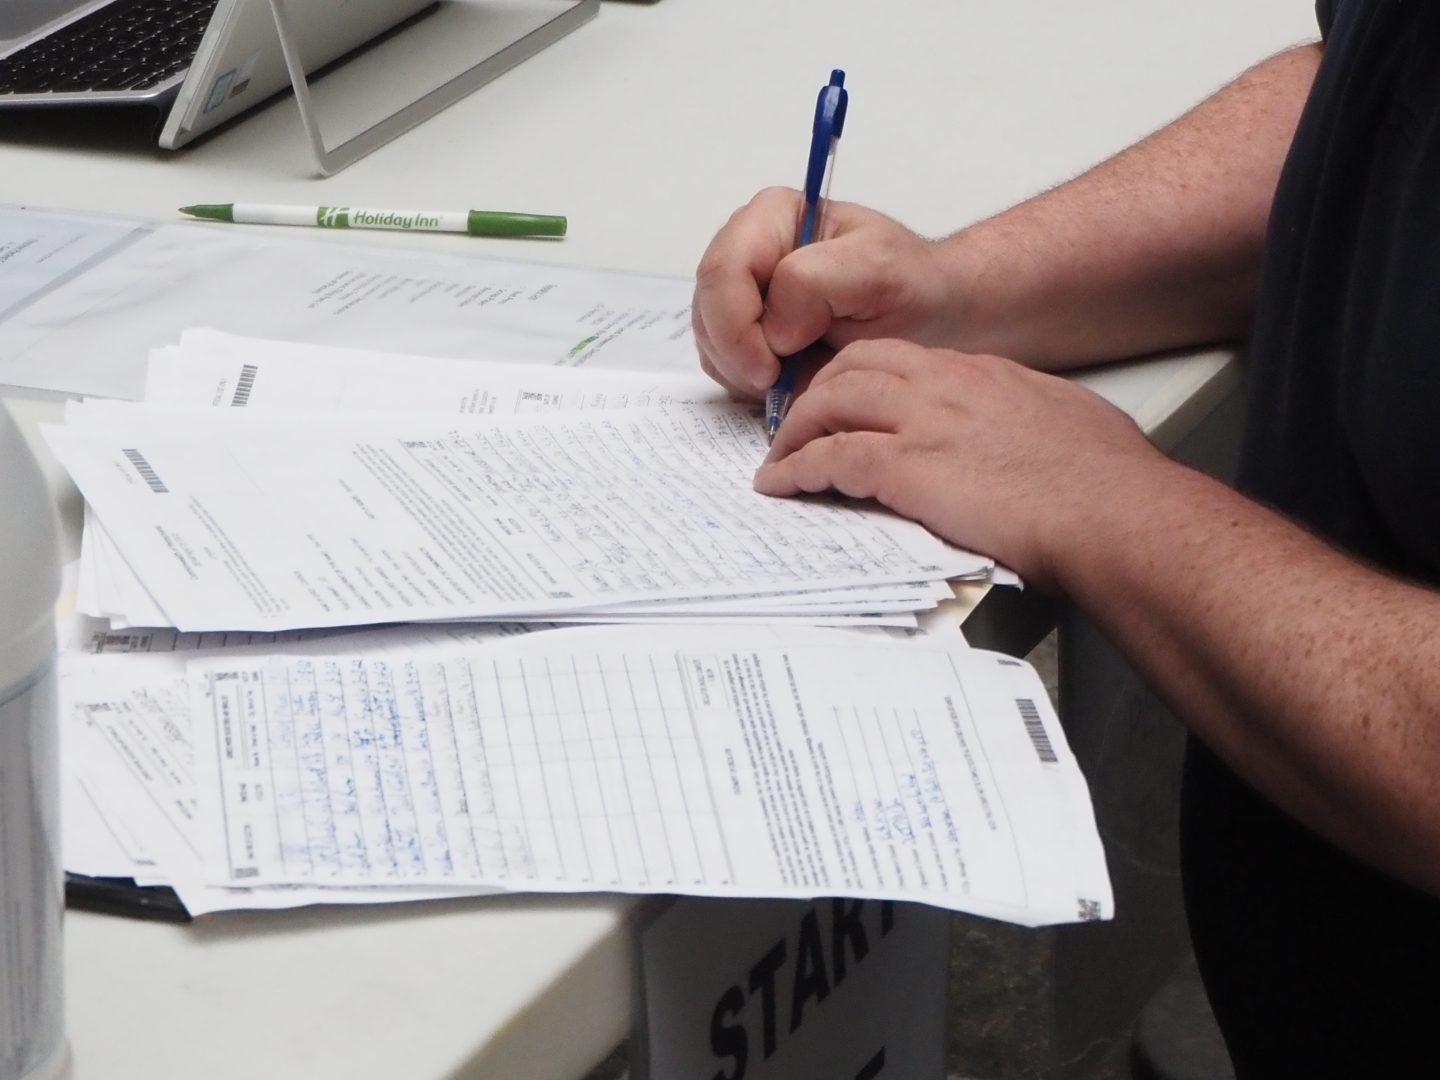  A worker for Republican gubernatorial candidate Dave White signs the last stack of petitions for the campaign at a Department of  State collection site in Harrisburg on March 15, 2022.